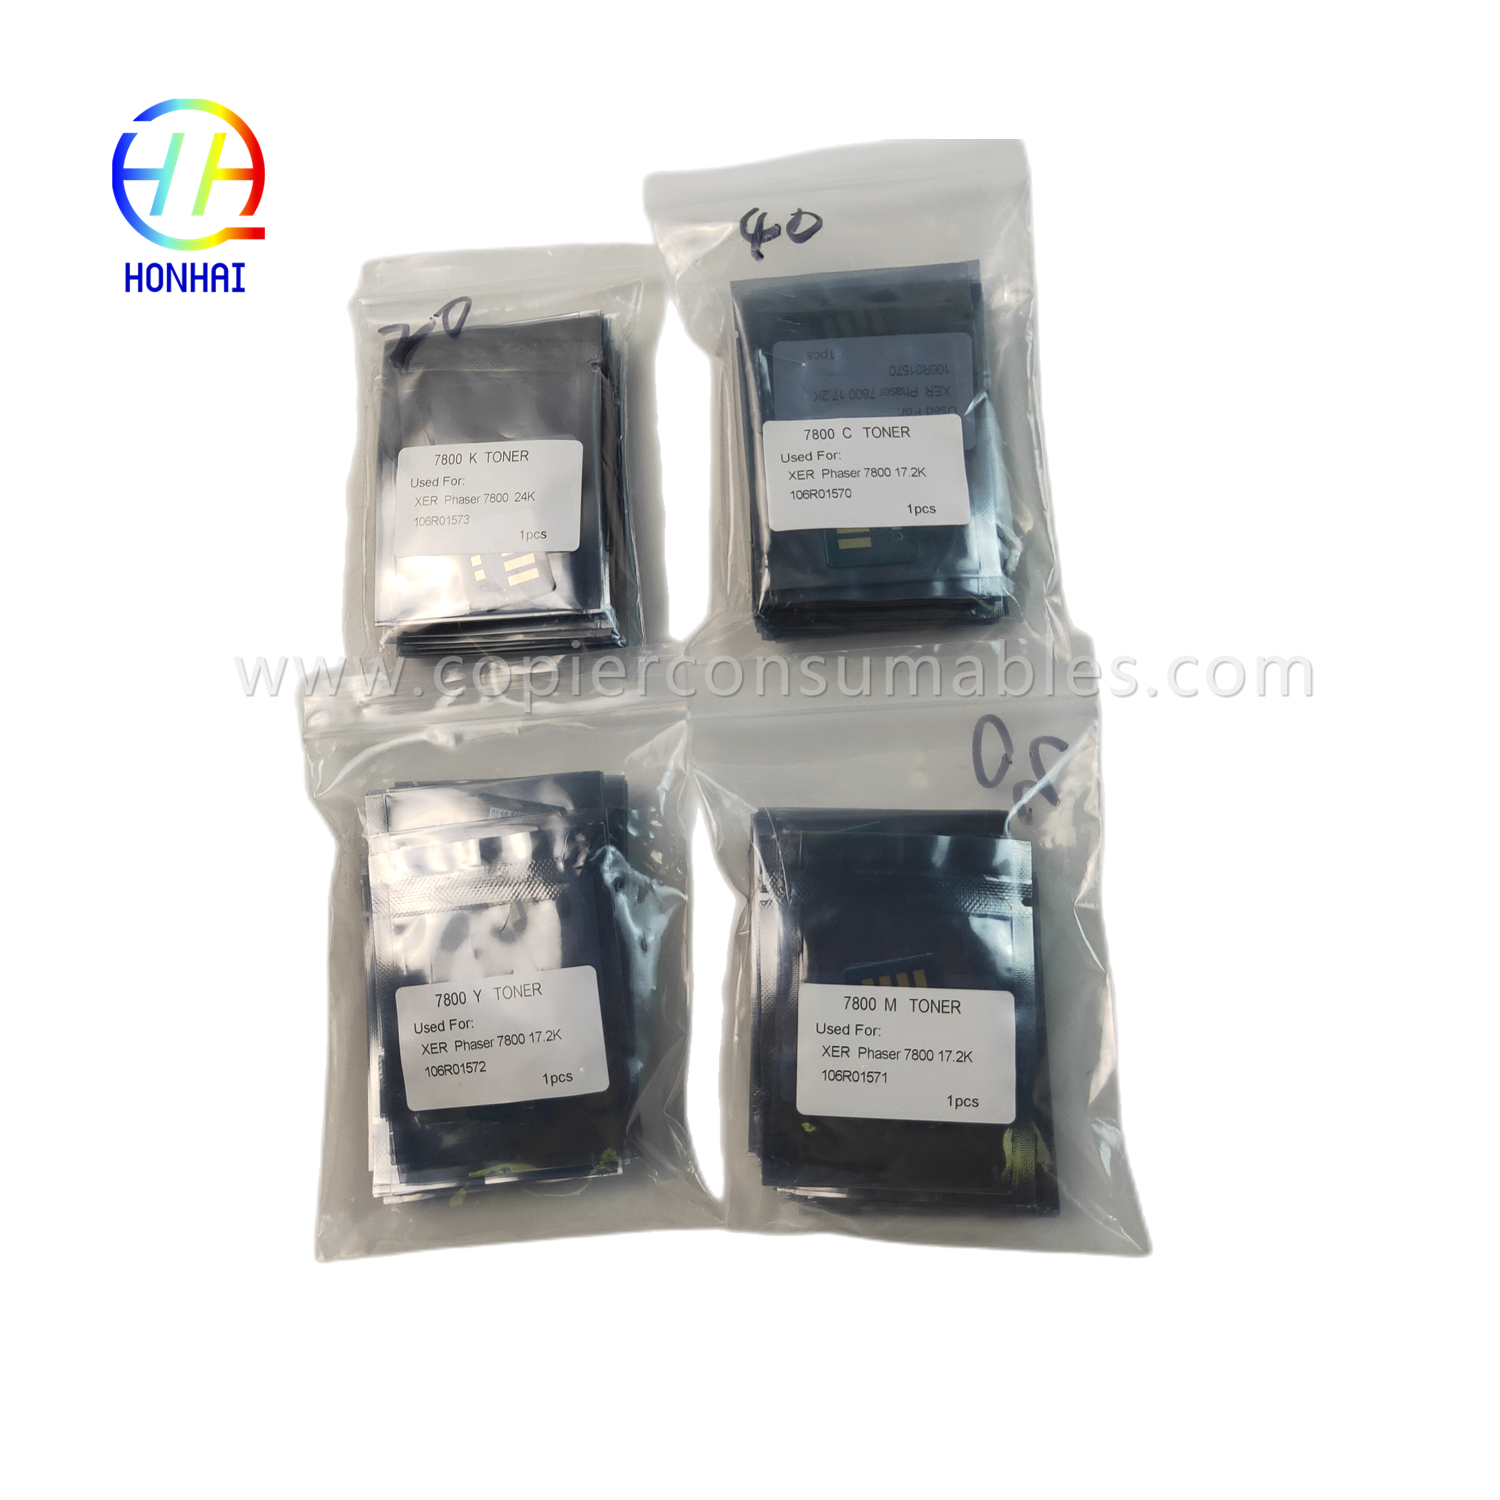 https://www.copierconsumables.com/toner-chip-set-for-xerox-phaser-7800-106r01573-106r01570-106r01571-106r01572-chip-2-product/